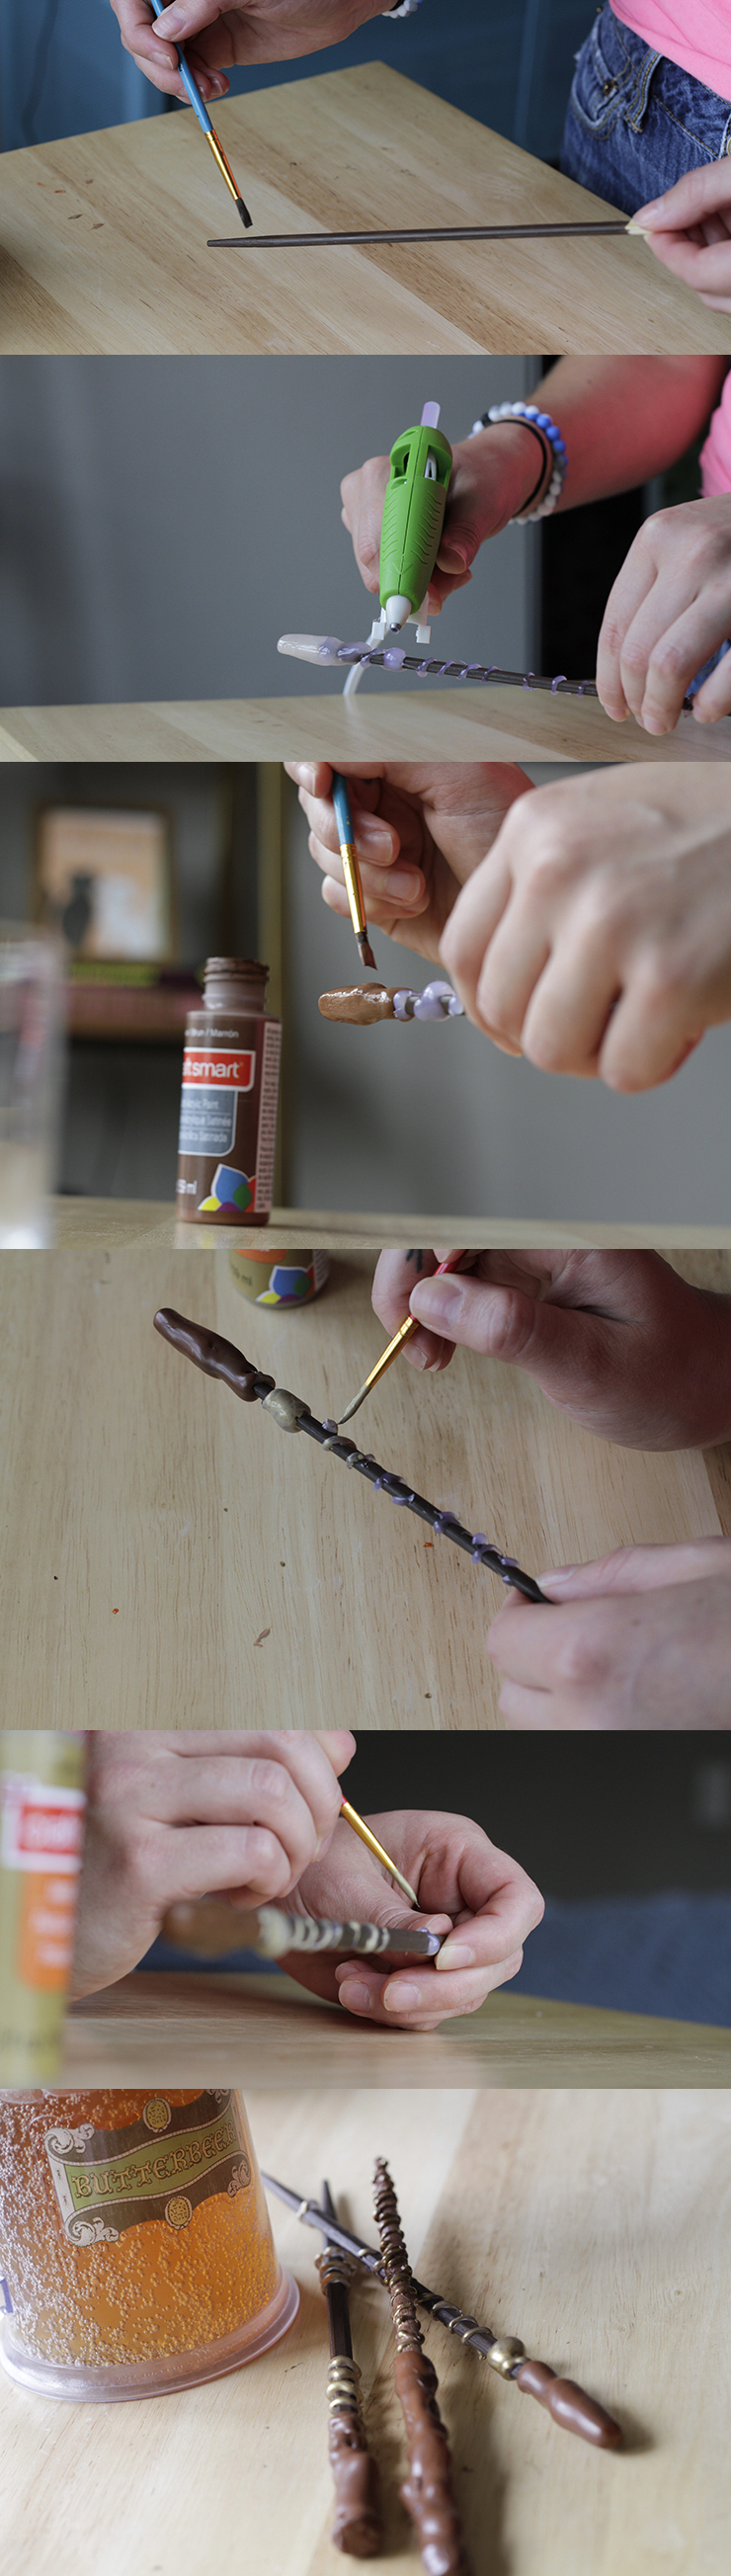 This simple tutorial will help you make a DIY Harry Potter wand. Perfect for a Harry Potter party or gift. So easy, it will feel like magic!